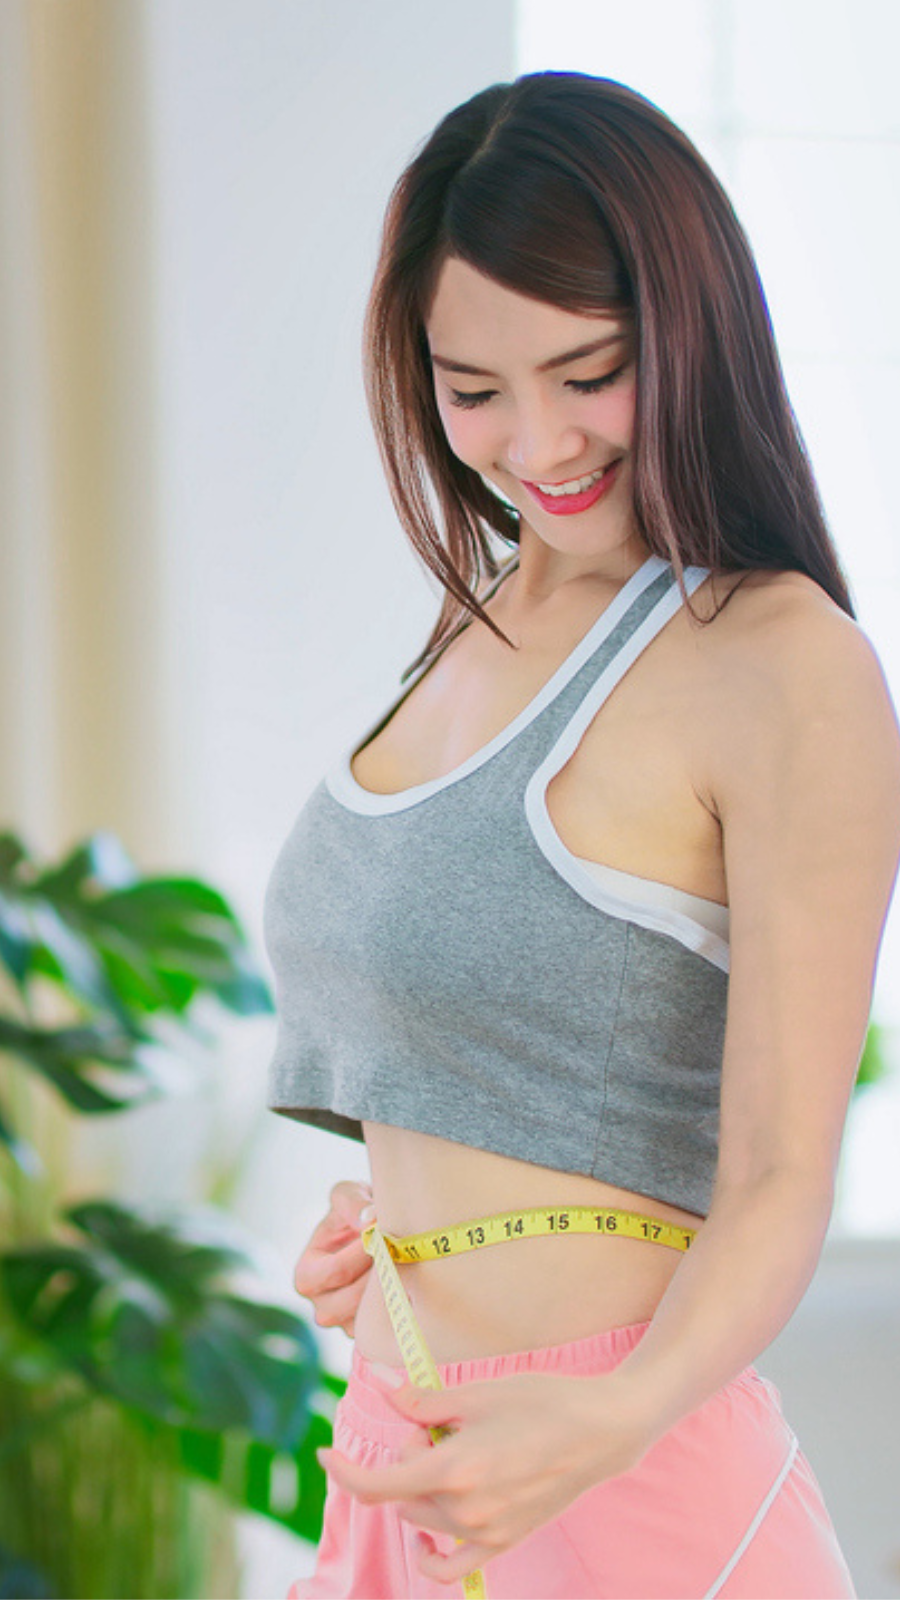 10 Morning Habits To Help You Lose Belly Fat Quickly